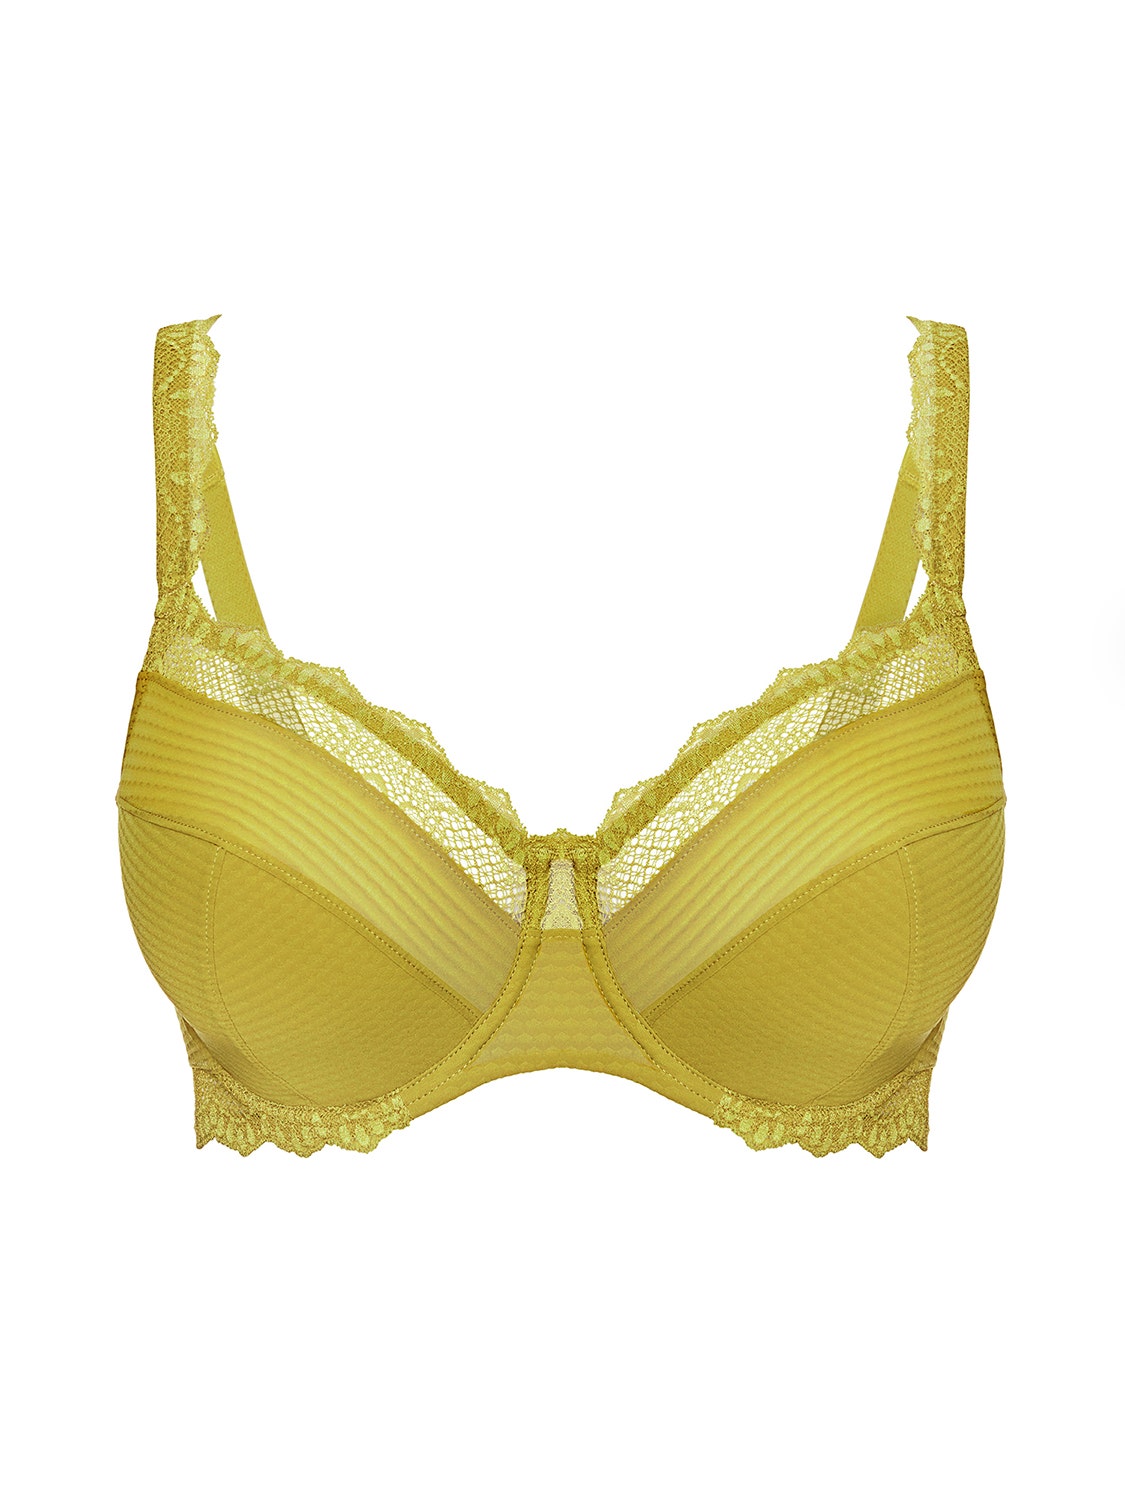 full-cup-support-bra-matcha-candide-40